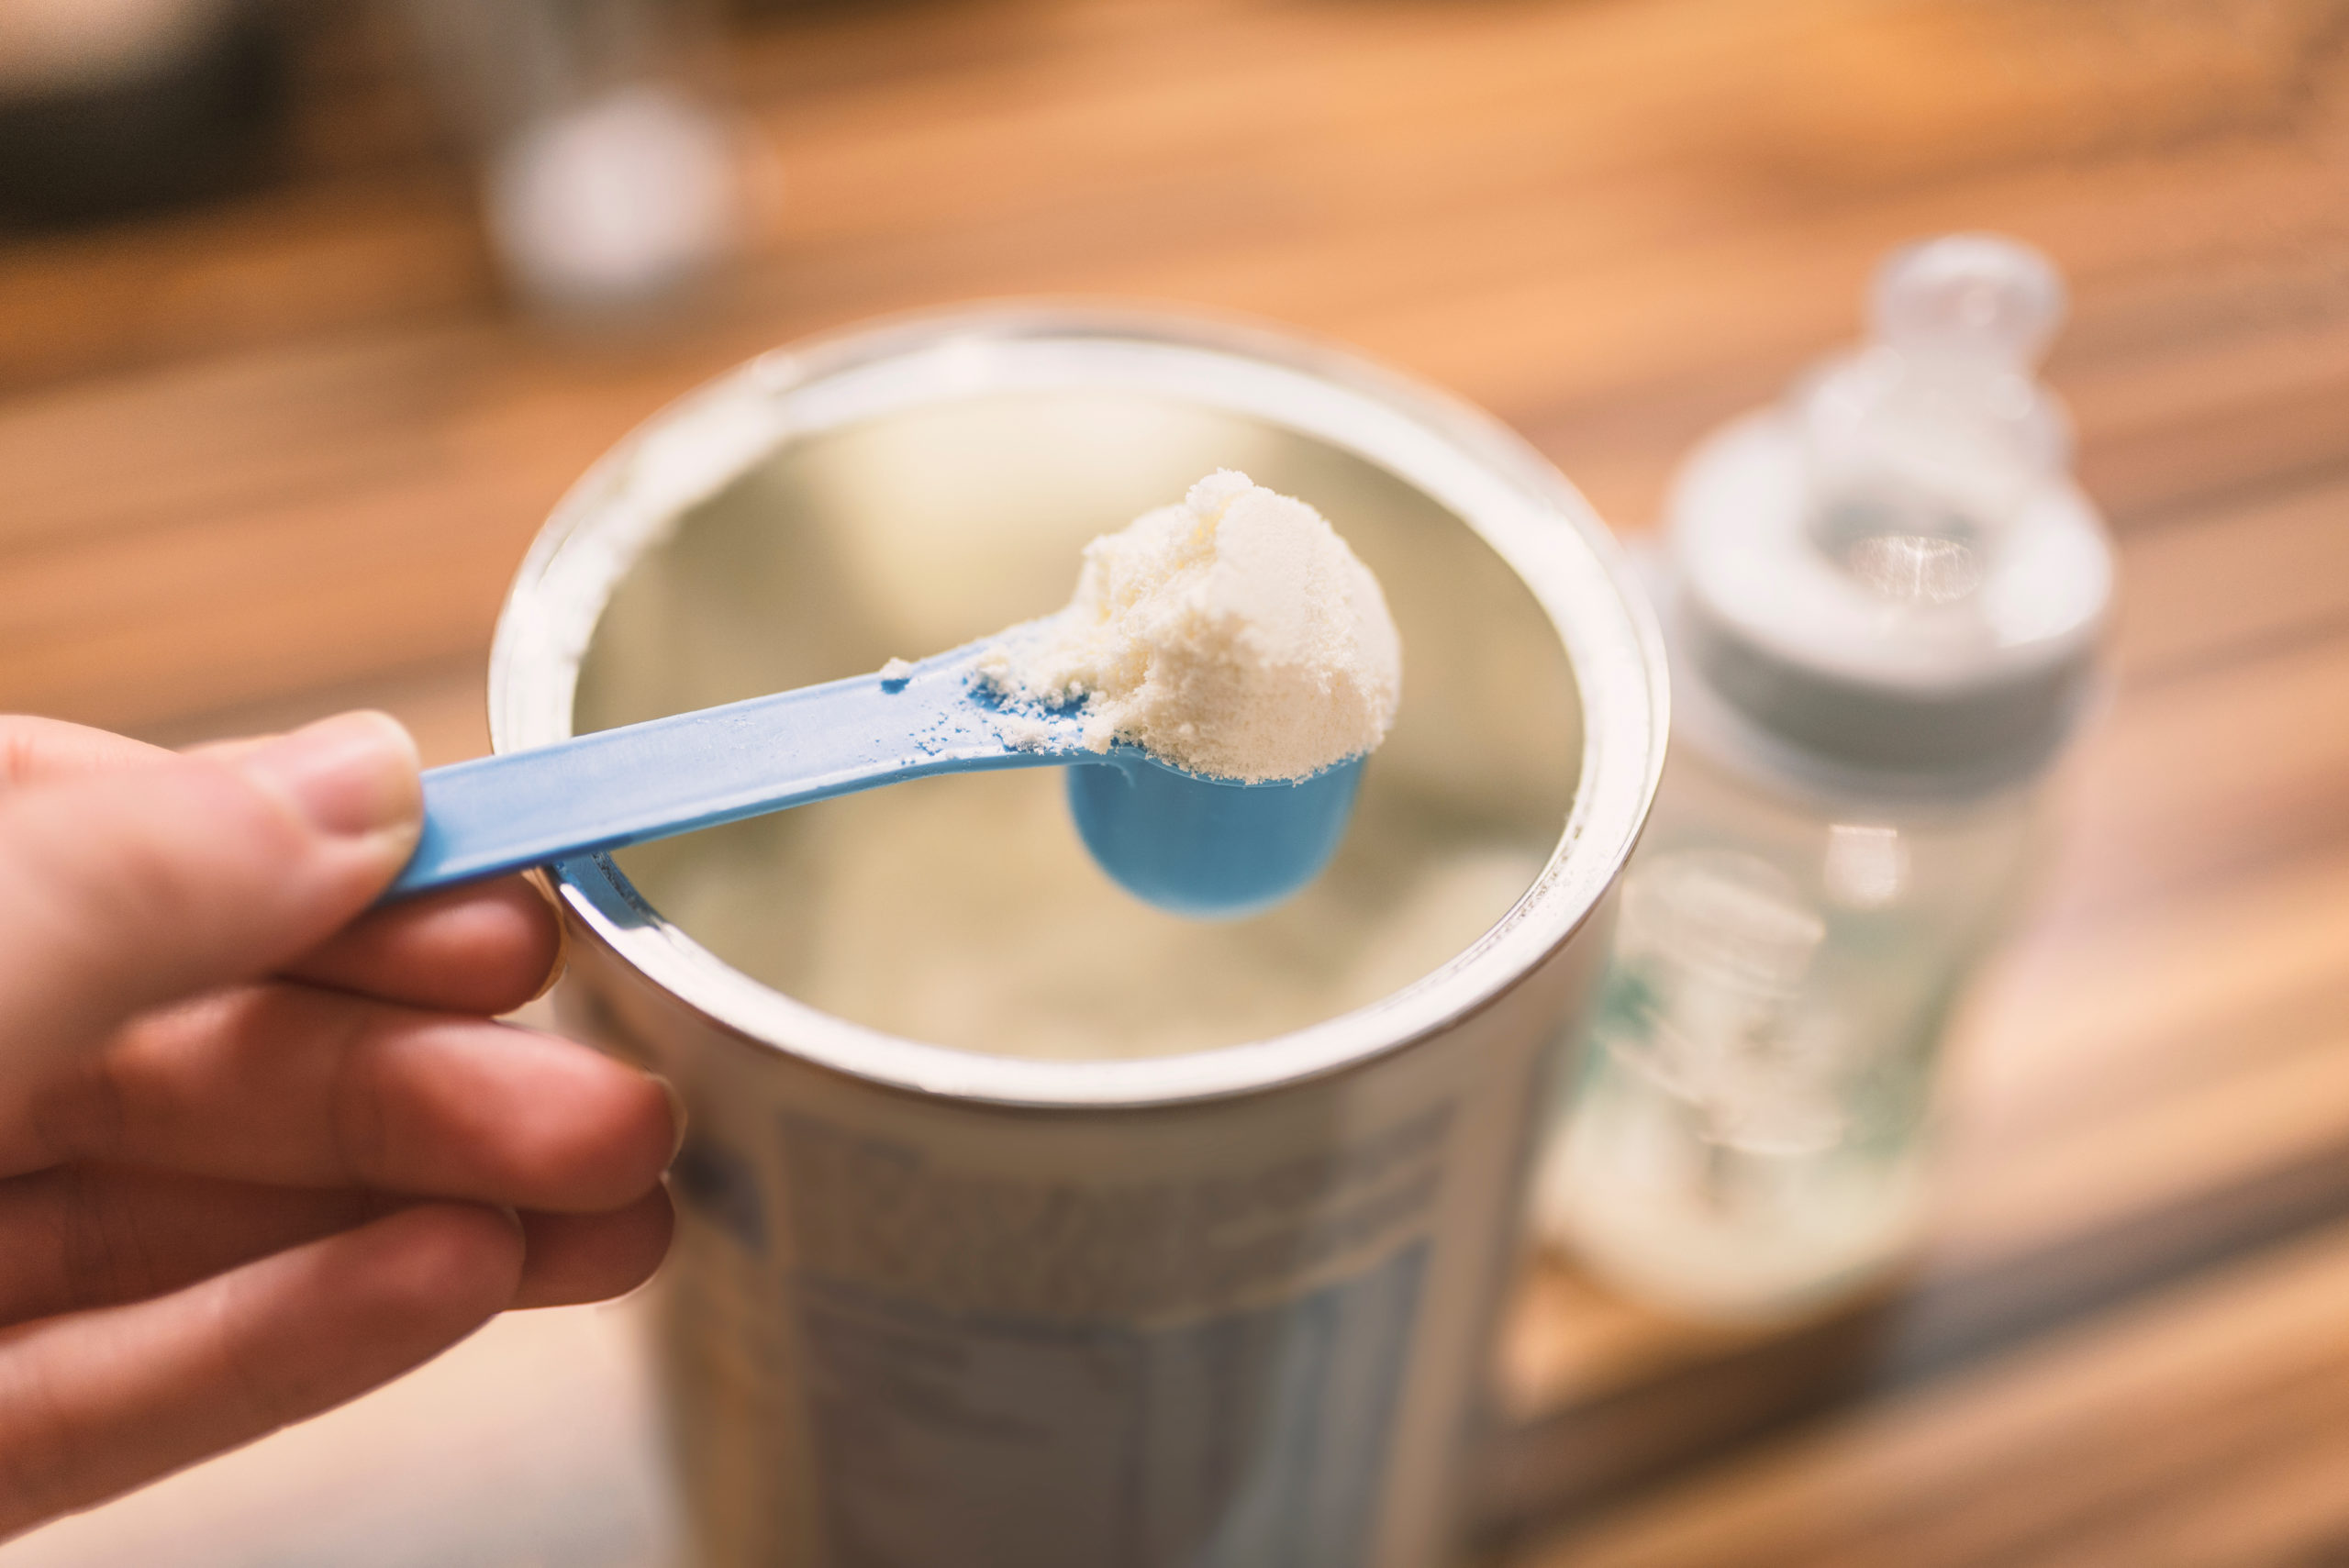 Powder milk for baby and blue spoon on light background close-up